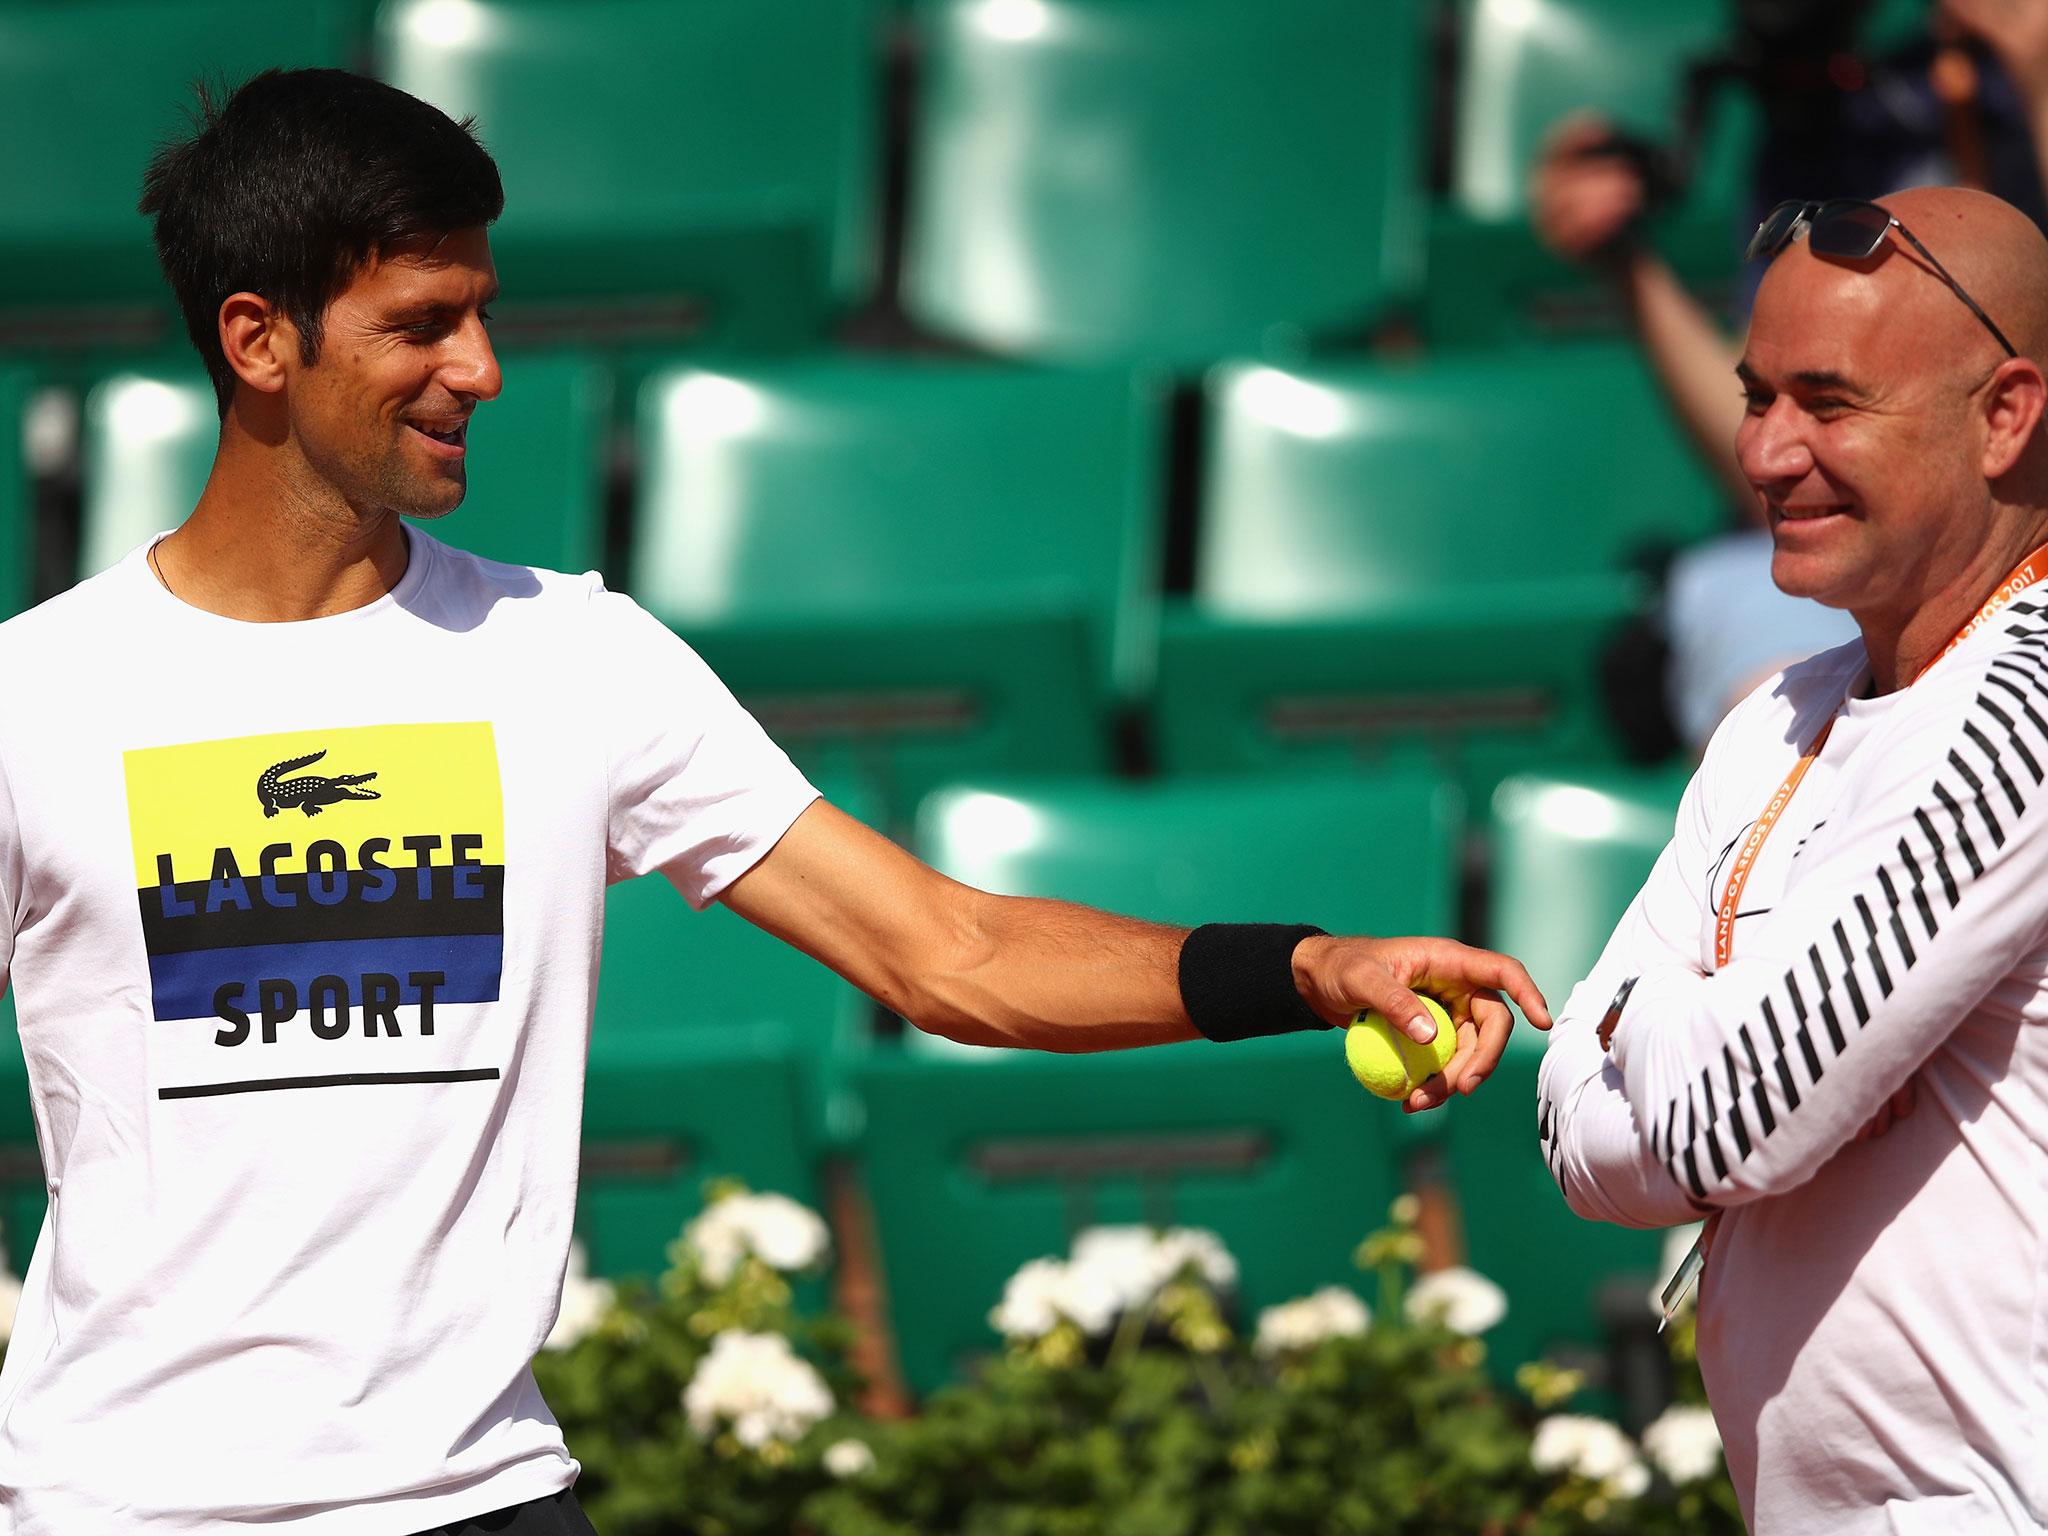 Novak Djokovic and Andre Agassi together during a training session